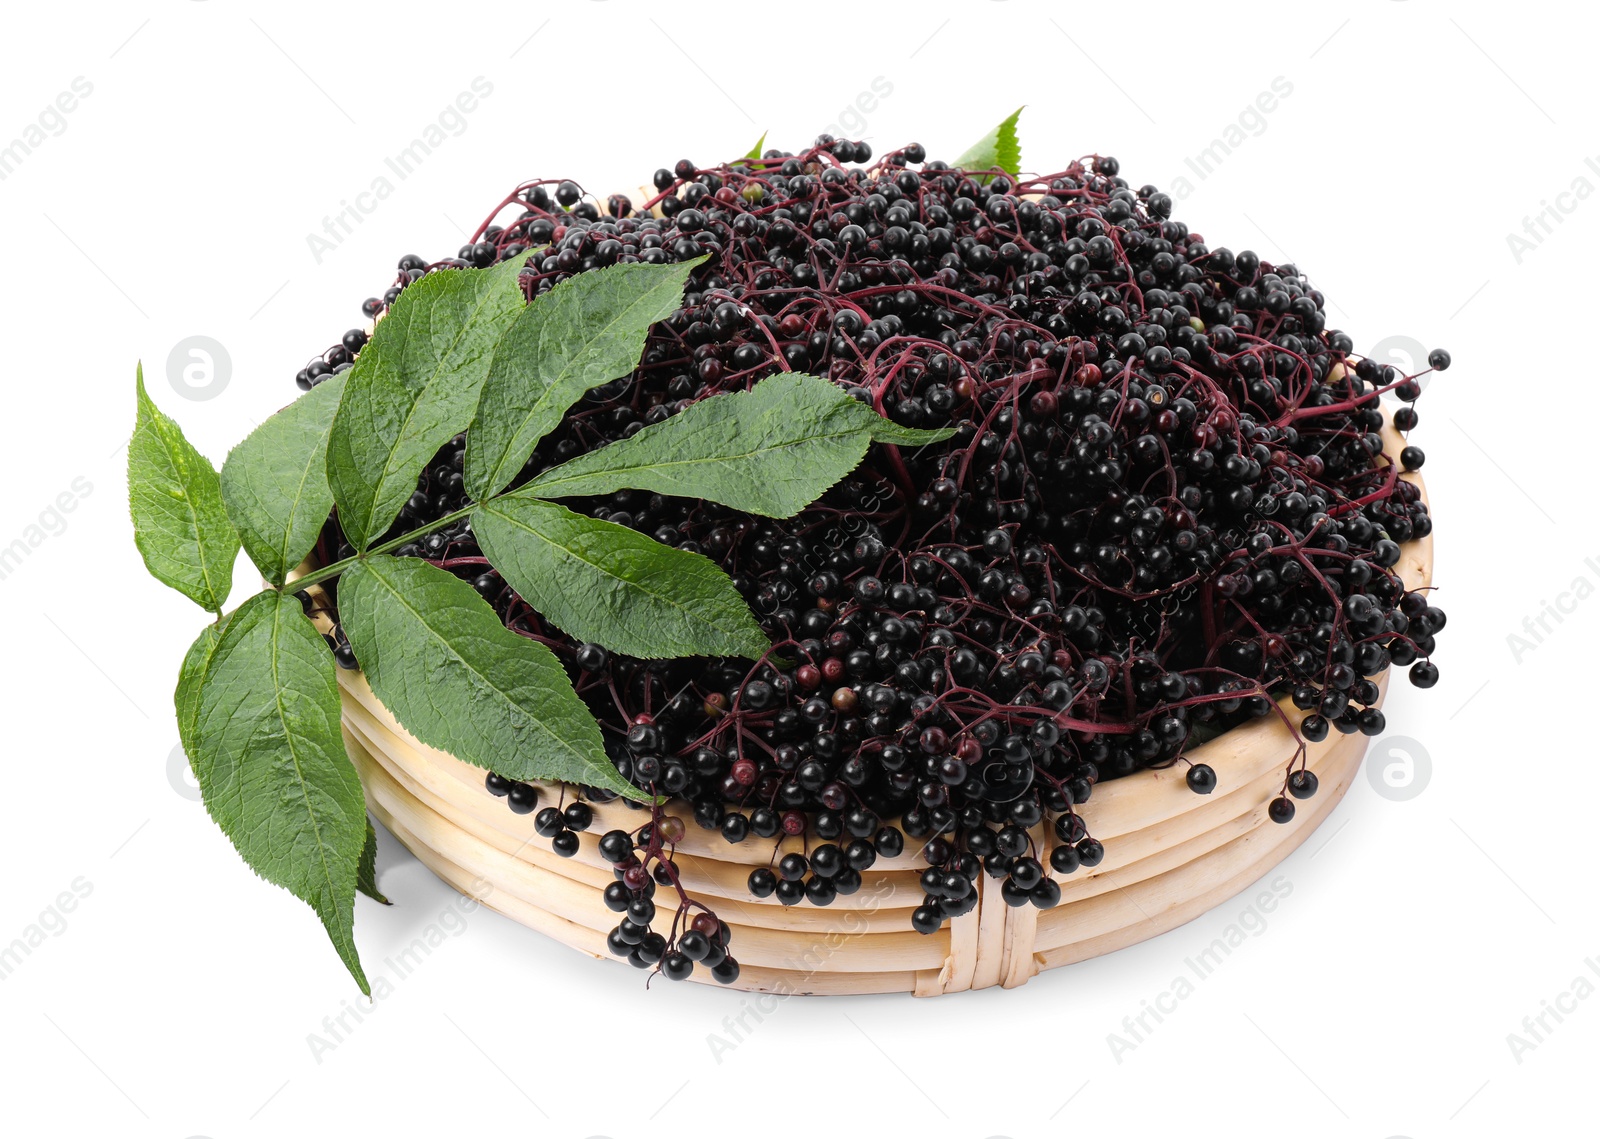 Photo of Wicker basket with ripe elderberries and green leaves isolated on white